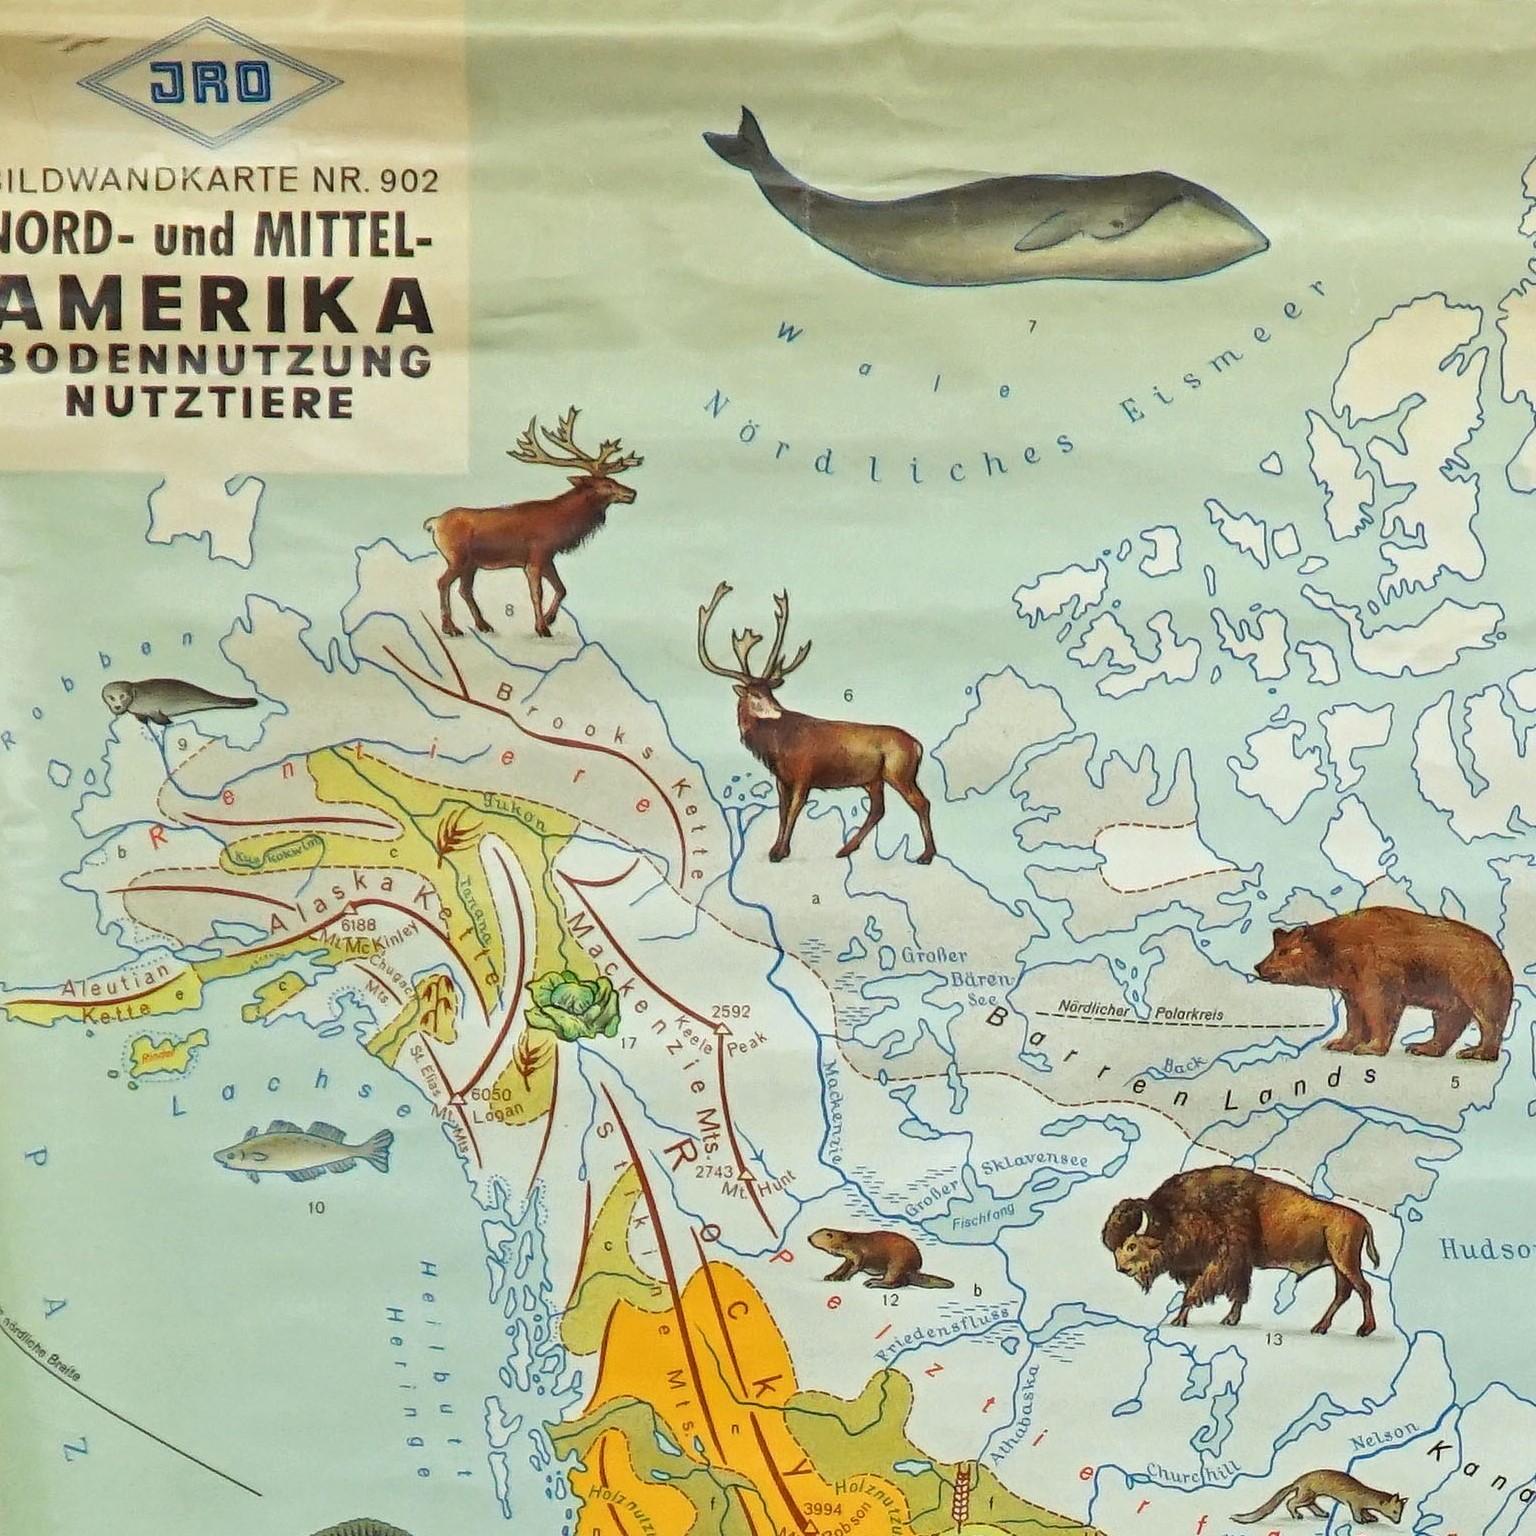 The vintage rollable picture map of North- and Middle America shows land use and livestock. Published by JRO. Colorful print on paper reinforced with canvas.
Measurements:
Width 90cm (35.43 inch)
Height 120cm (47.24 inch)

The measurements shown